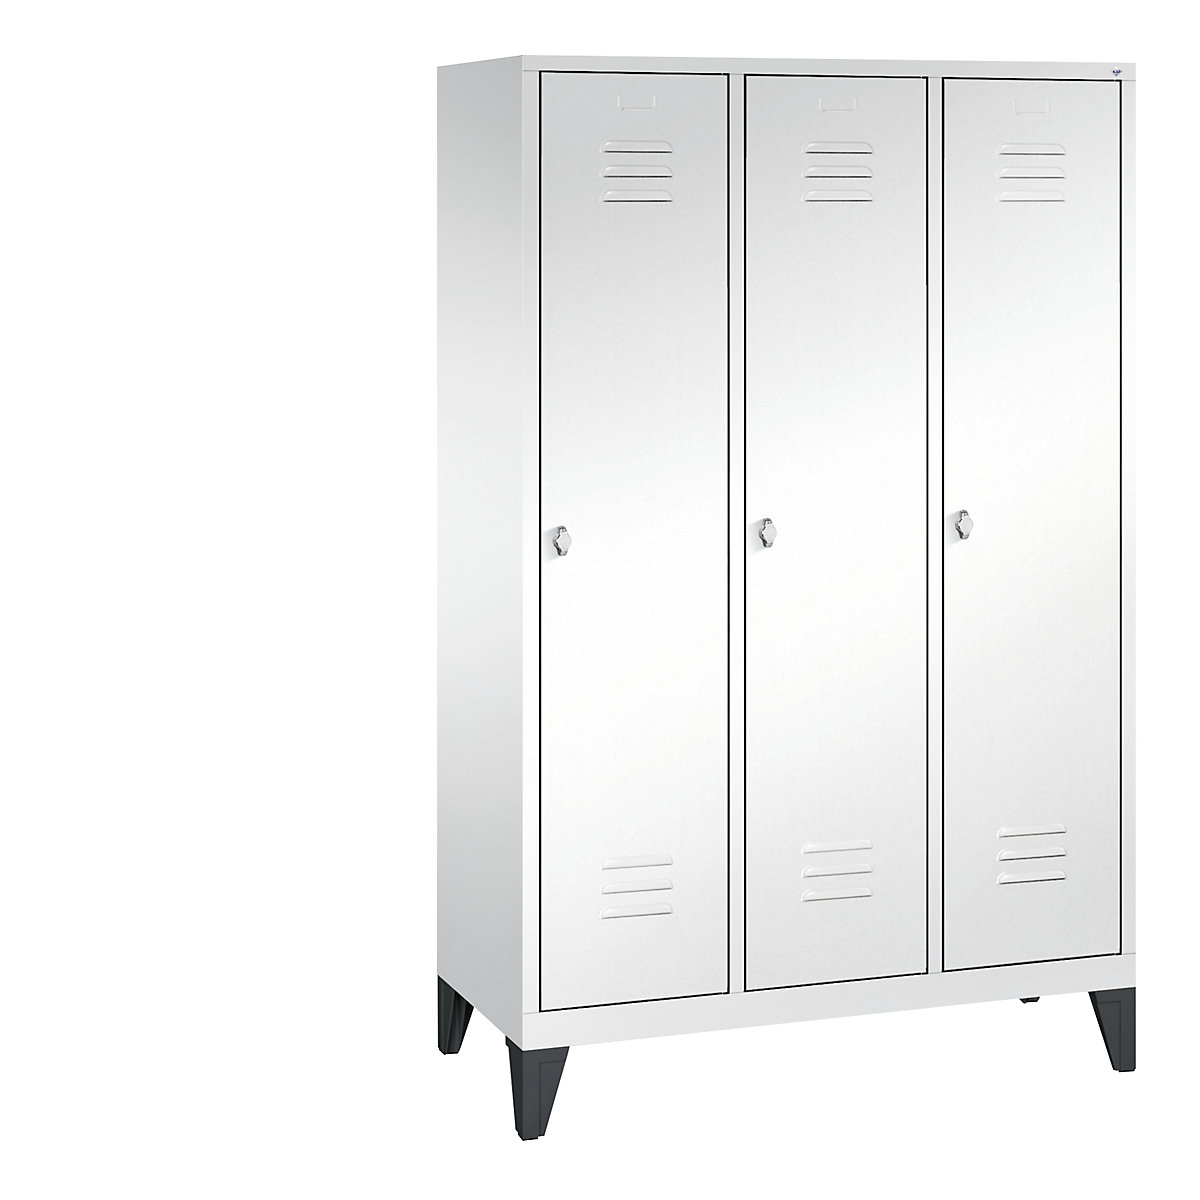 CLASSIC cloakroom locker with feet – C+P, 3 compartments, compartment width 400 mm, traffic white-13